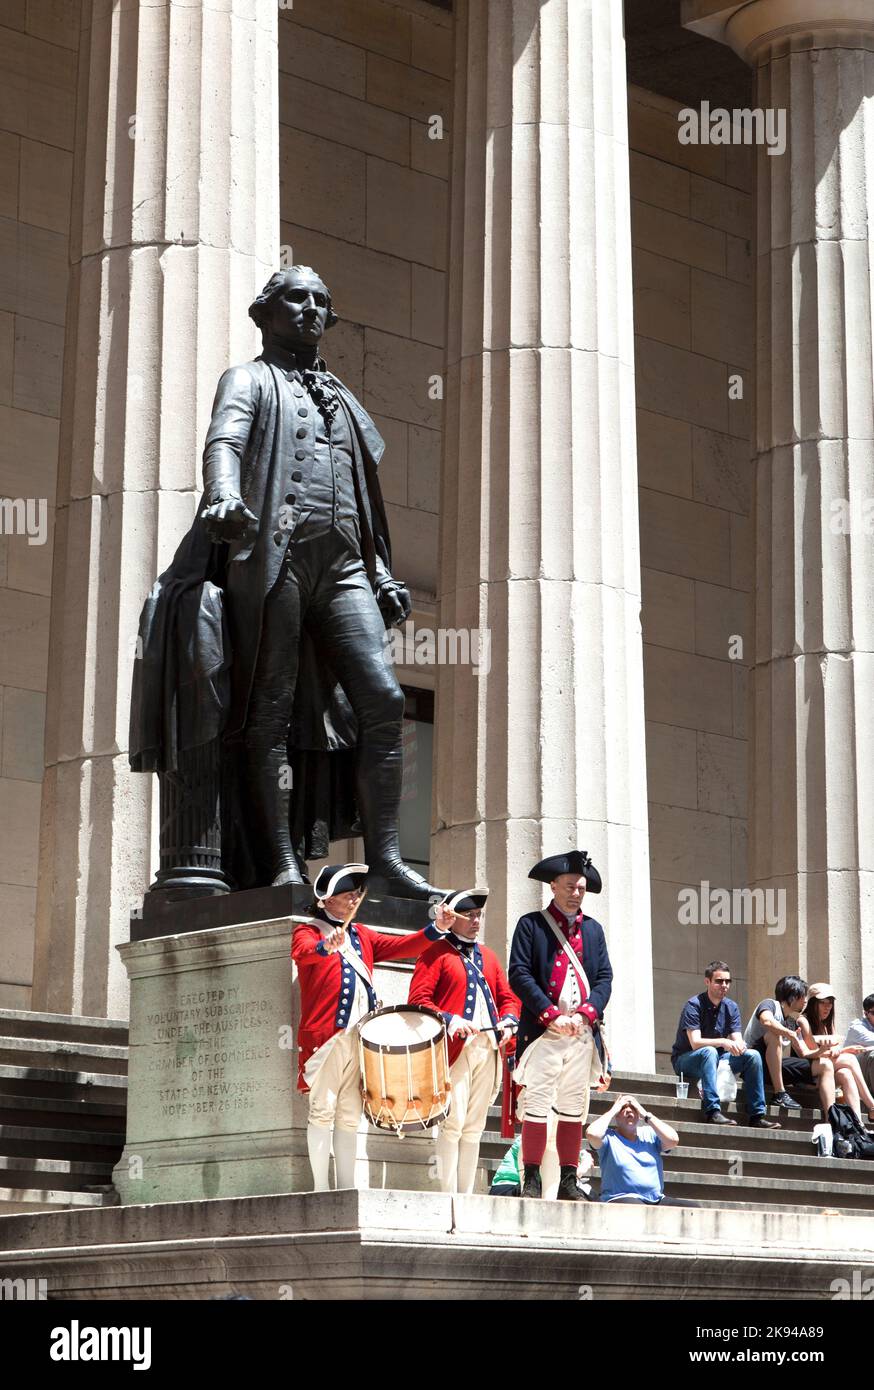 NEW YORK, USA – JULY 9: Ceremony for declaration of independence in old costumes takes place at the Washington statue in front of federal Hall Nationa Stock Photo